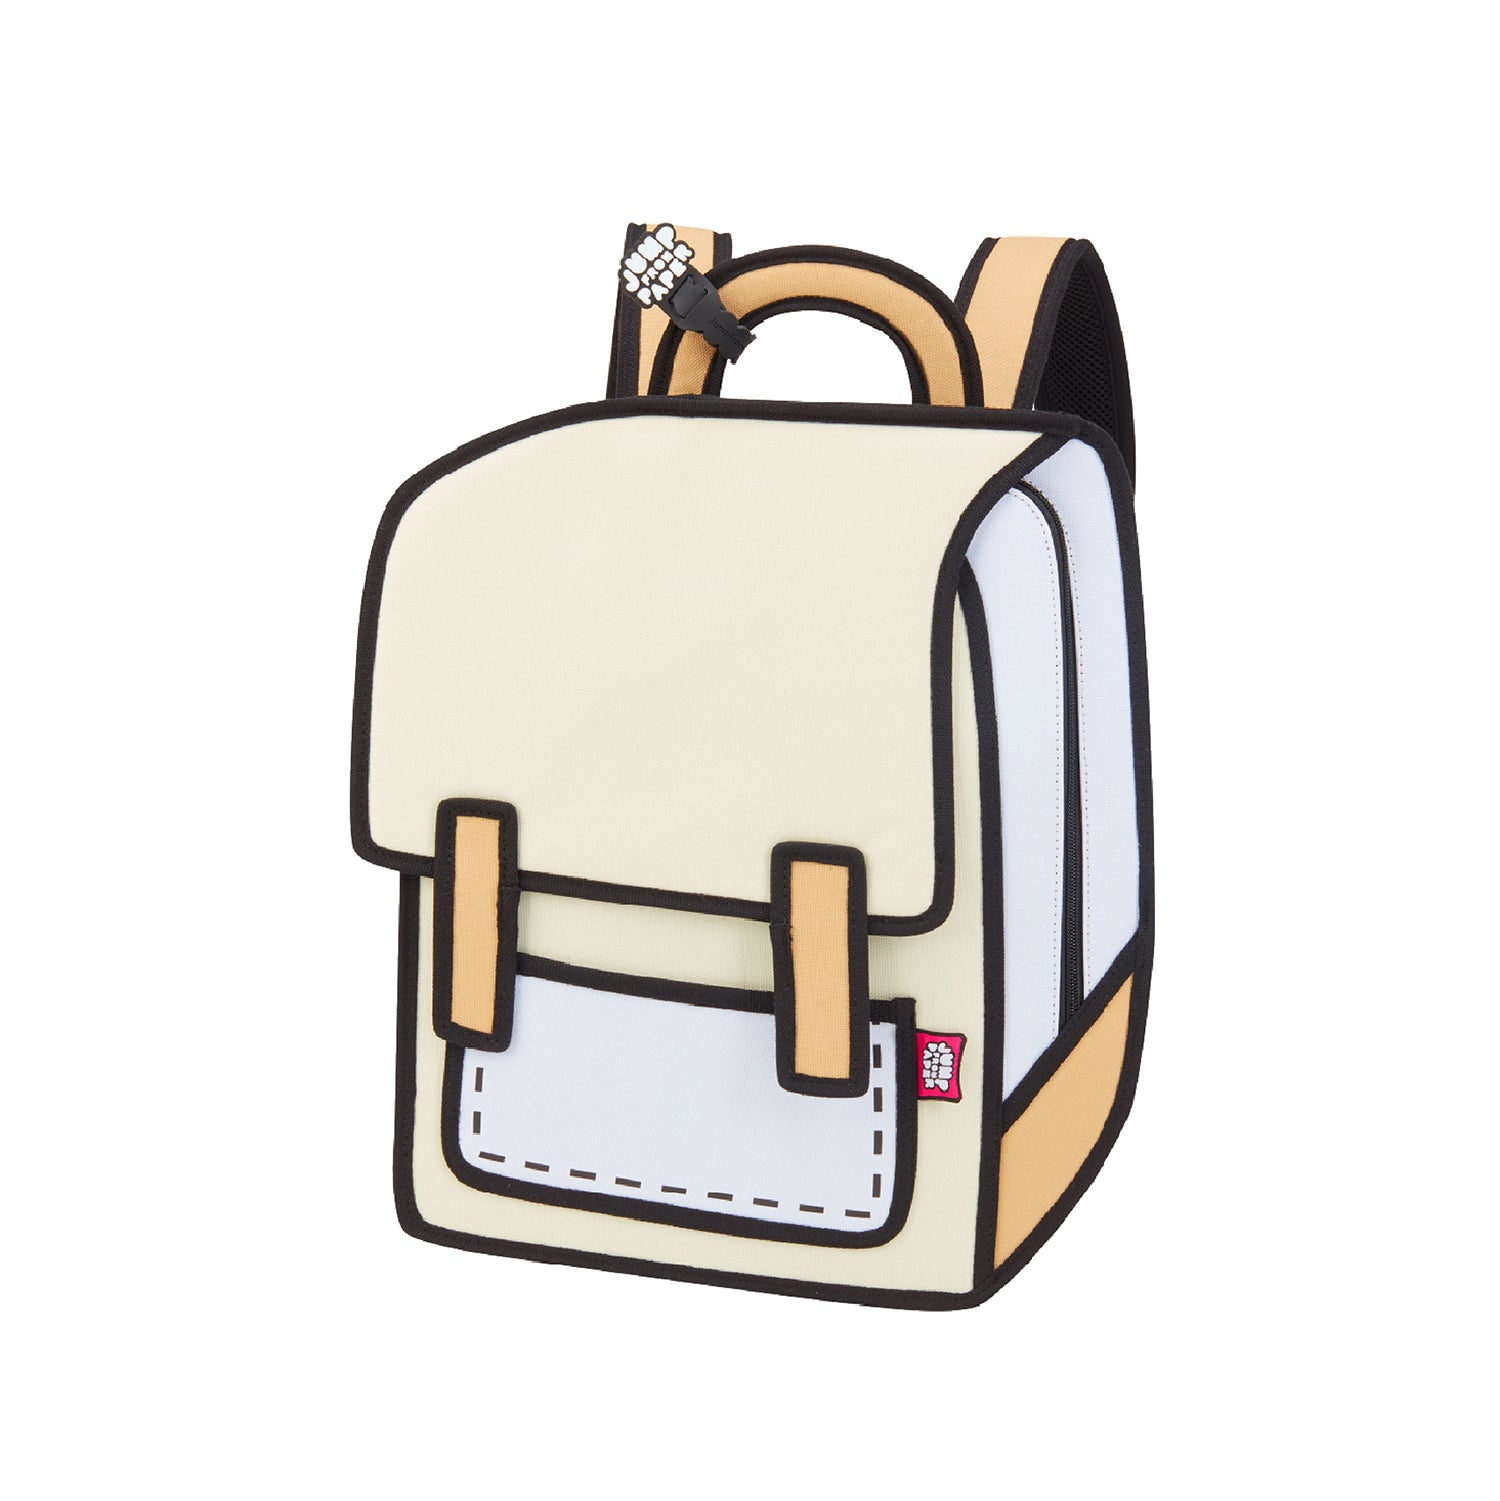 back pack drawing